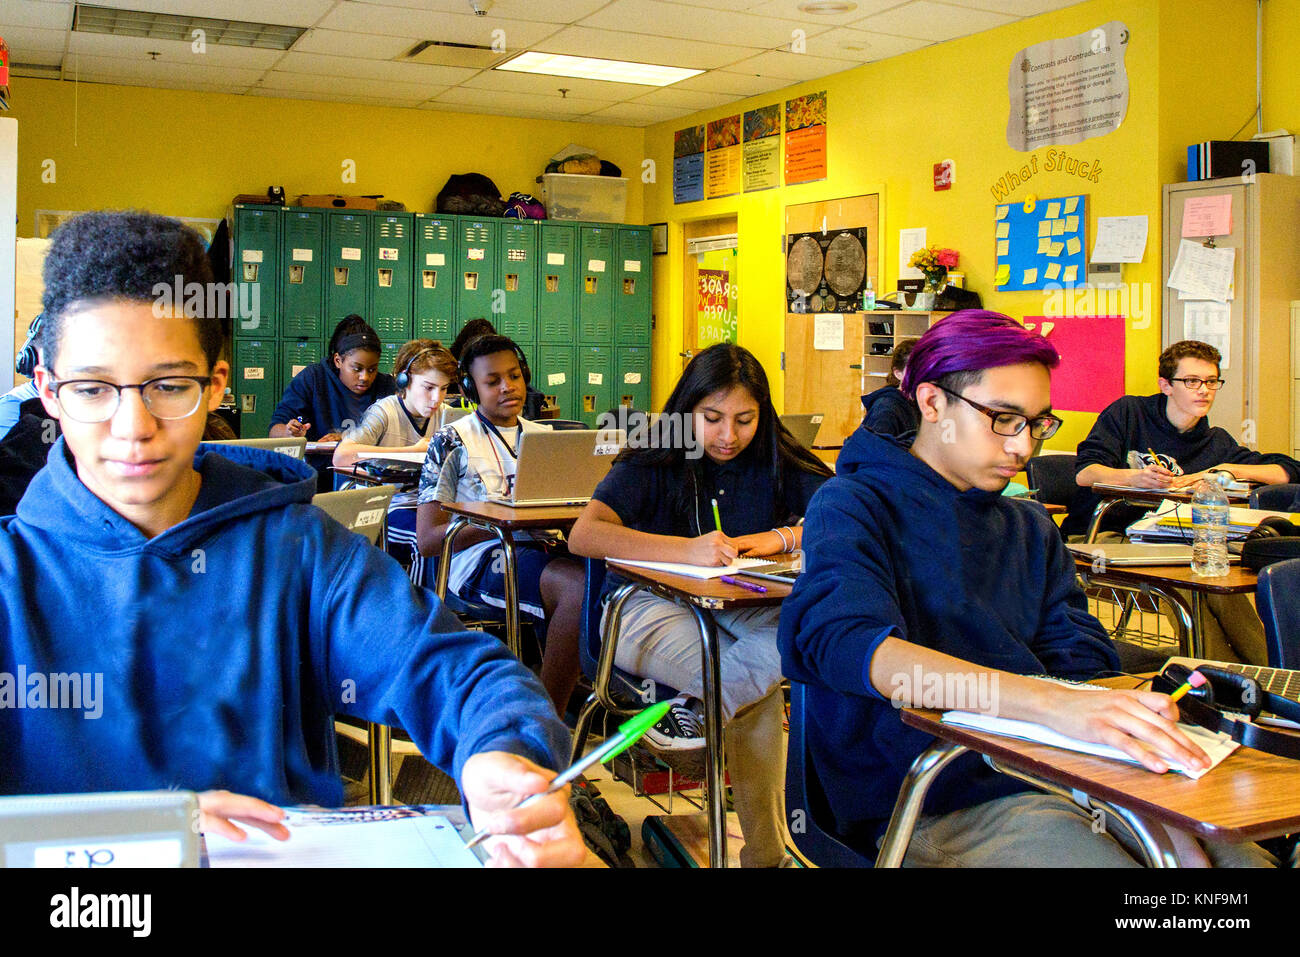 Class of teenage boys and girls doing schoolwork at classroom desks Stock Photo